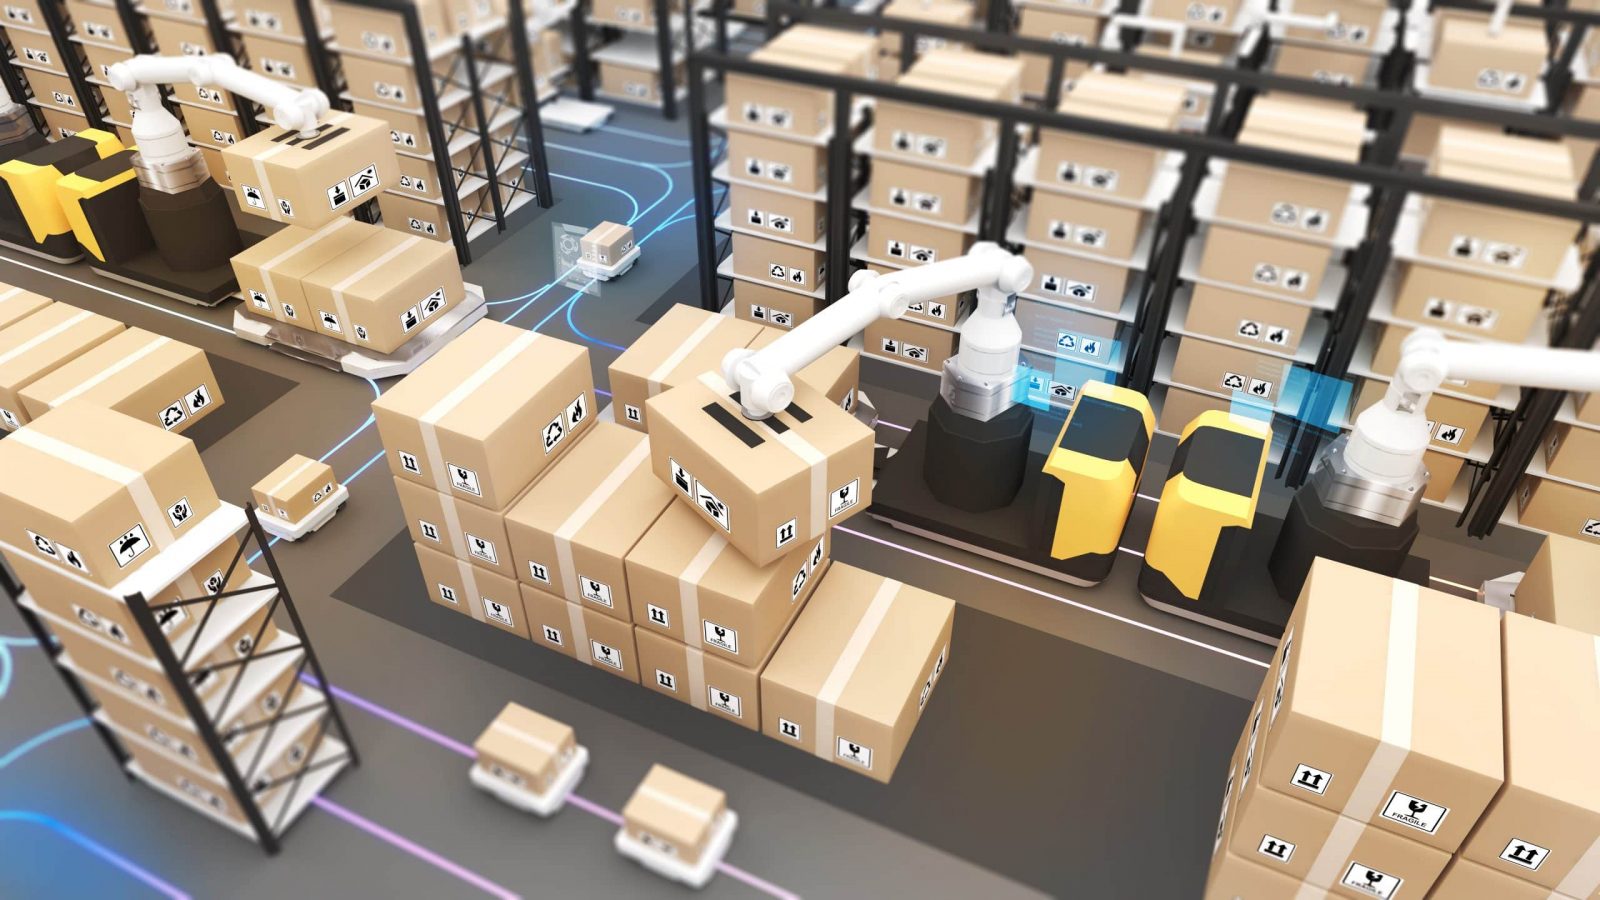 Large warehouses use robotic arms and delivery robots to pick up